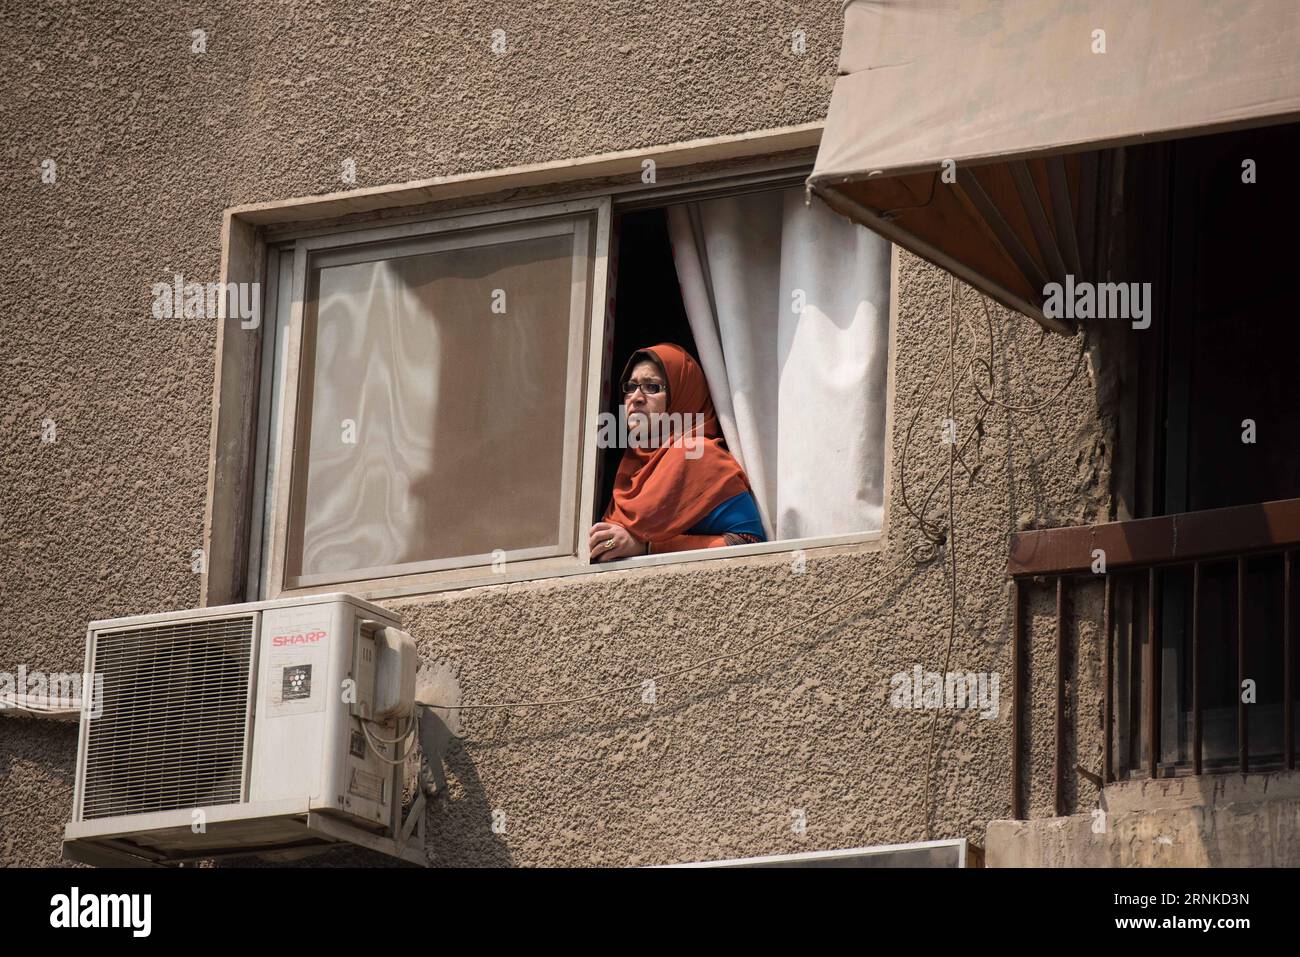 (170324) -- CAIRO, March 24, 2017 -- A woman looks out of the window near the explosion site at Maadi district in Cairo, Egypt, March 24, 2017. One person was killed and four others wounded on Friday when an explosive device went off in a garden in Maadi district southeastern the capital Cairo, the interior ministry said in a statement. ) (zw) EGYPT-CAIRO-BLAST MengxTao PUBLICATIONxNOTxINxCHN   Cairo March 24 2017 a Woman Looks out of The Window Near The Explosion Site AT Maadi District in Cairo Egypt March 24 2017 One Person what KILLED and Four Others Wounded ON Friday When to Explosive Devi Stock Photo